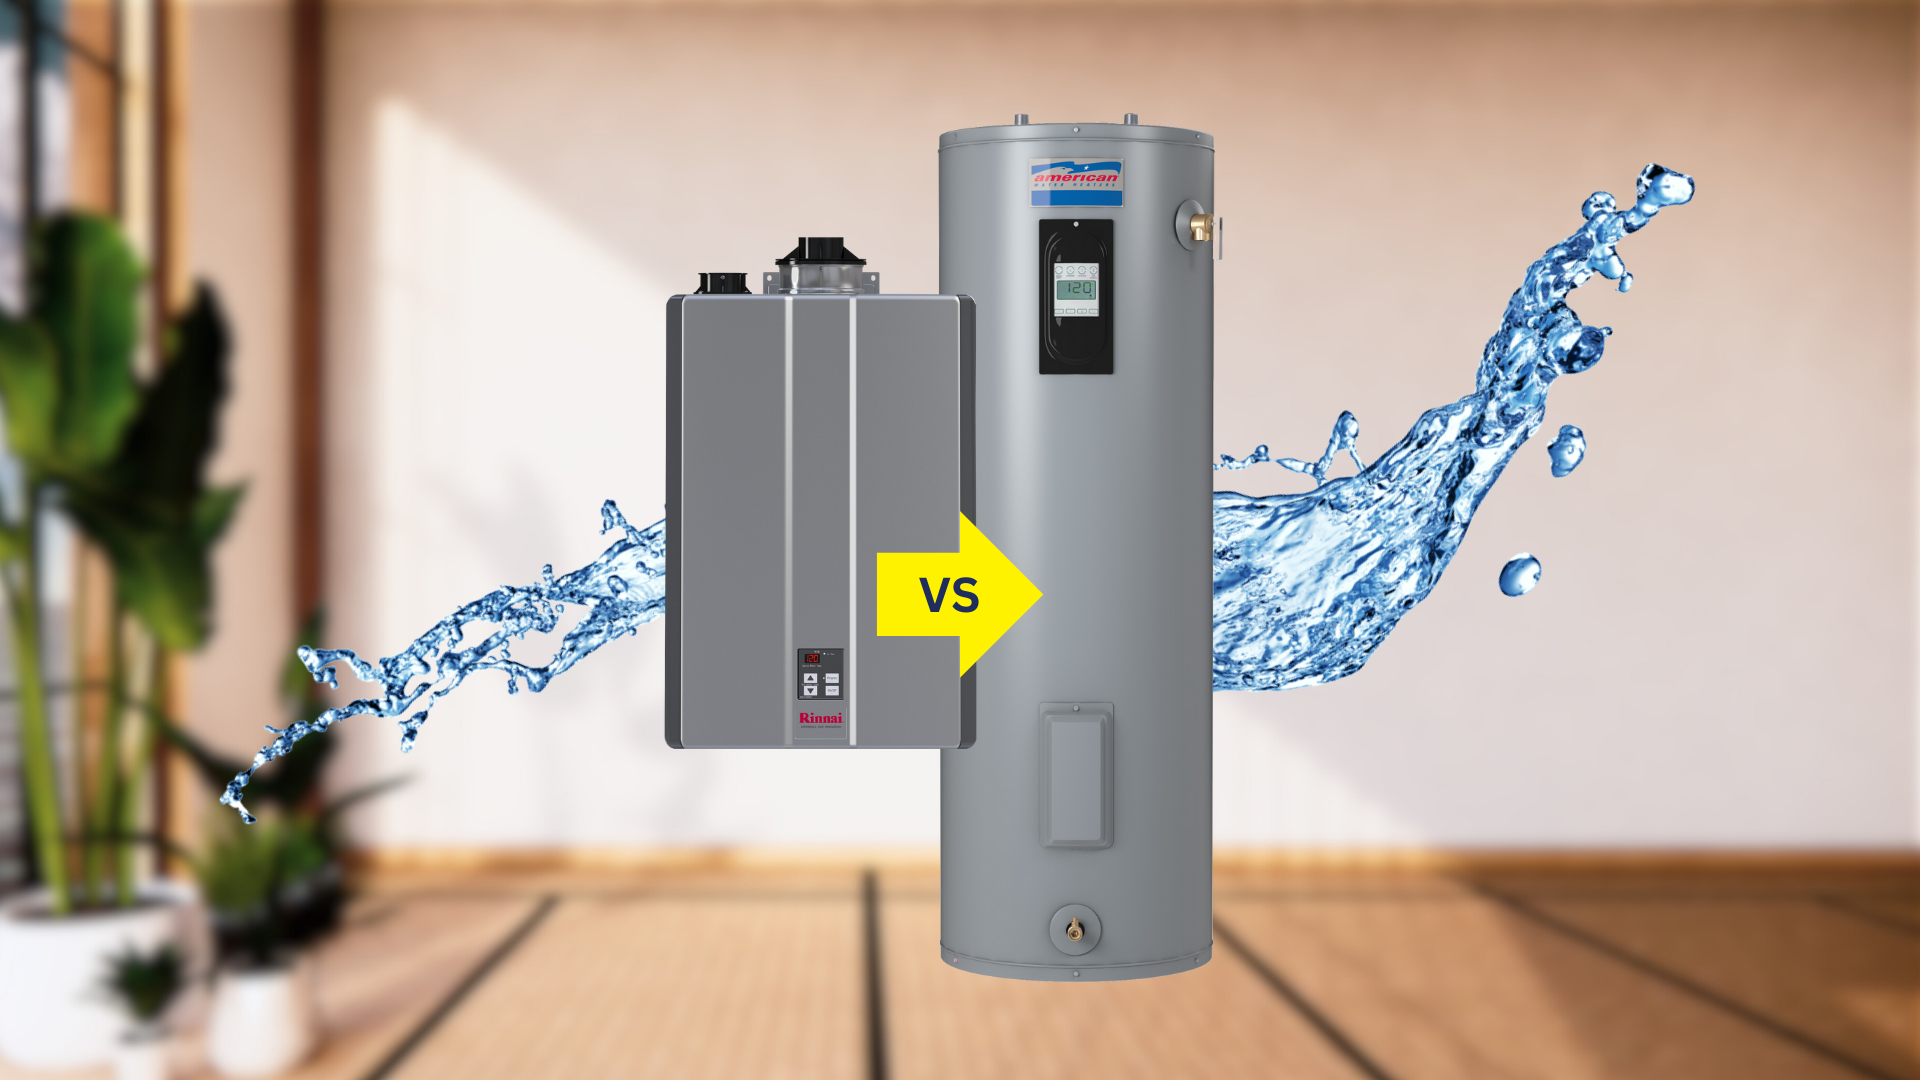 Tank or Tankless Water Heater: What's Right for Your Home's Hot Water System?